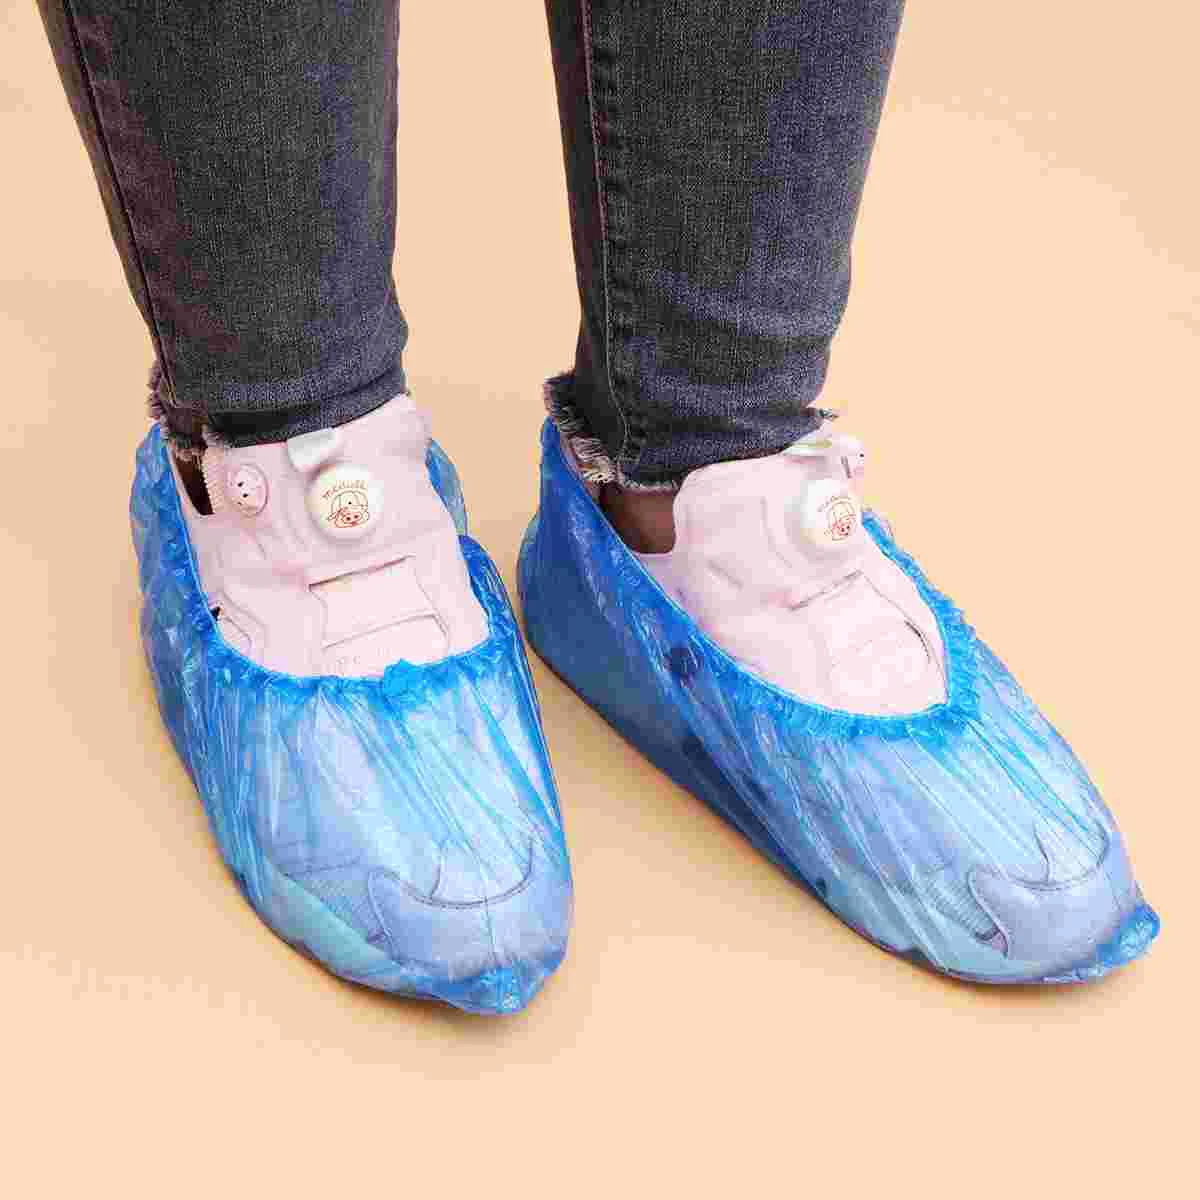 

100pcs Boot Shoe Covers Hygienic Shoe Covers Antislip Anti Saliva Shoes Cover for Home Workplace Visiting Construction Blue